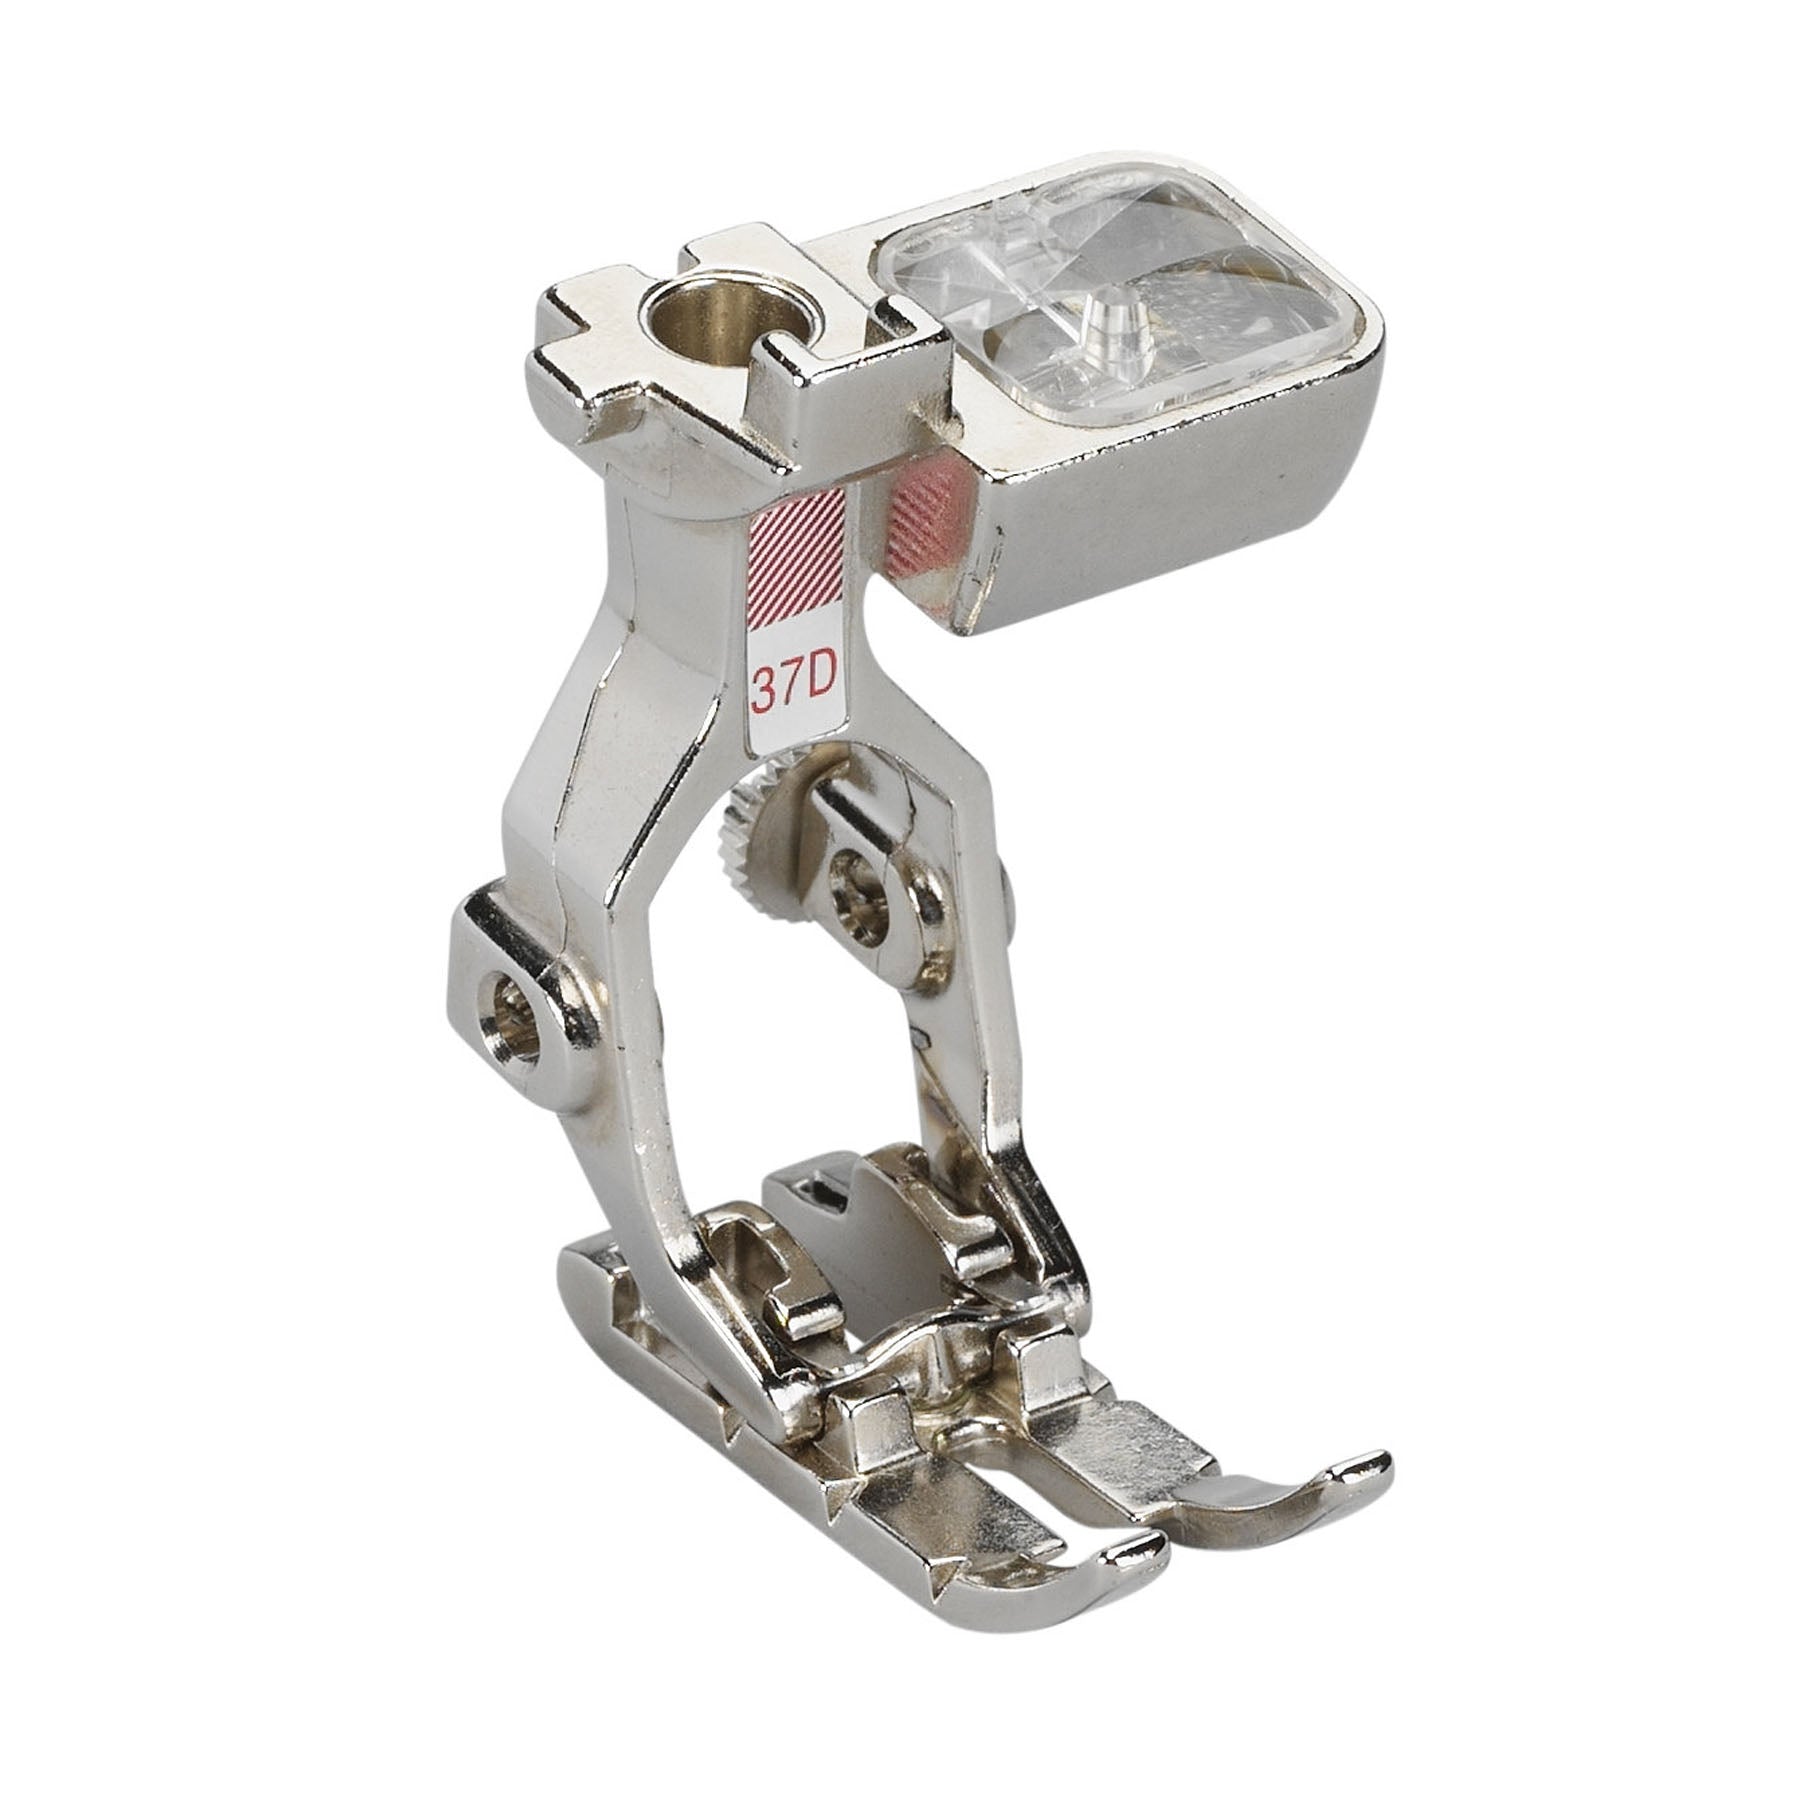 Bernina Patchwork Foot with Dual Feed #37D